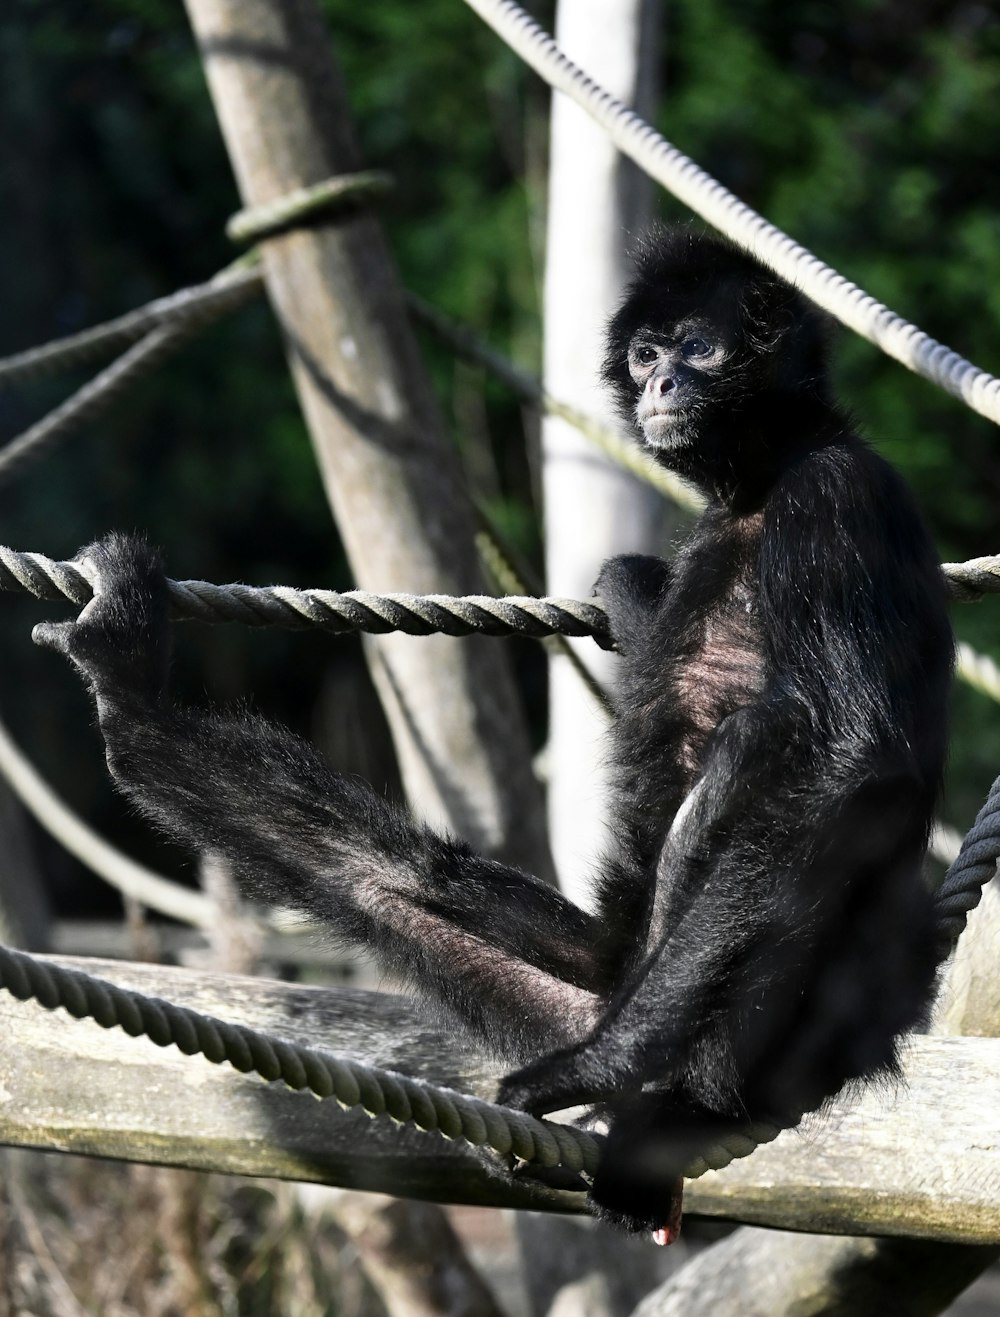 a monkey sitting on a rope in a zoo